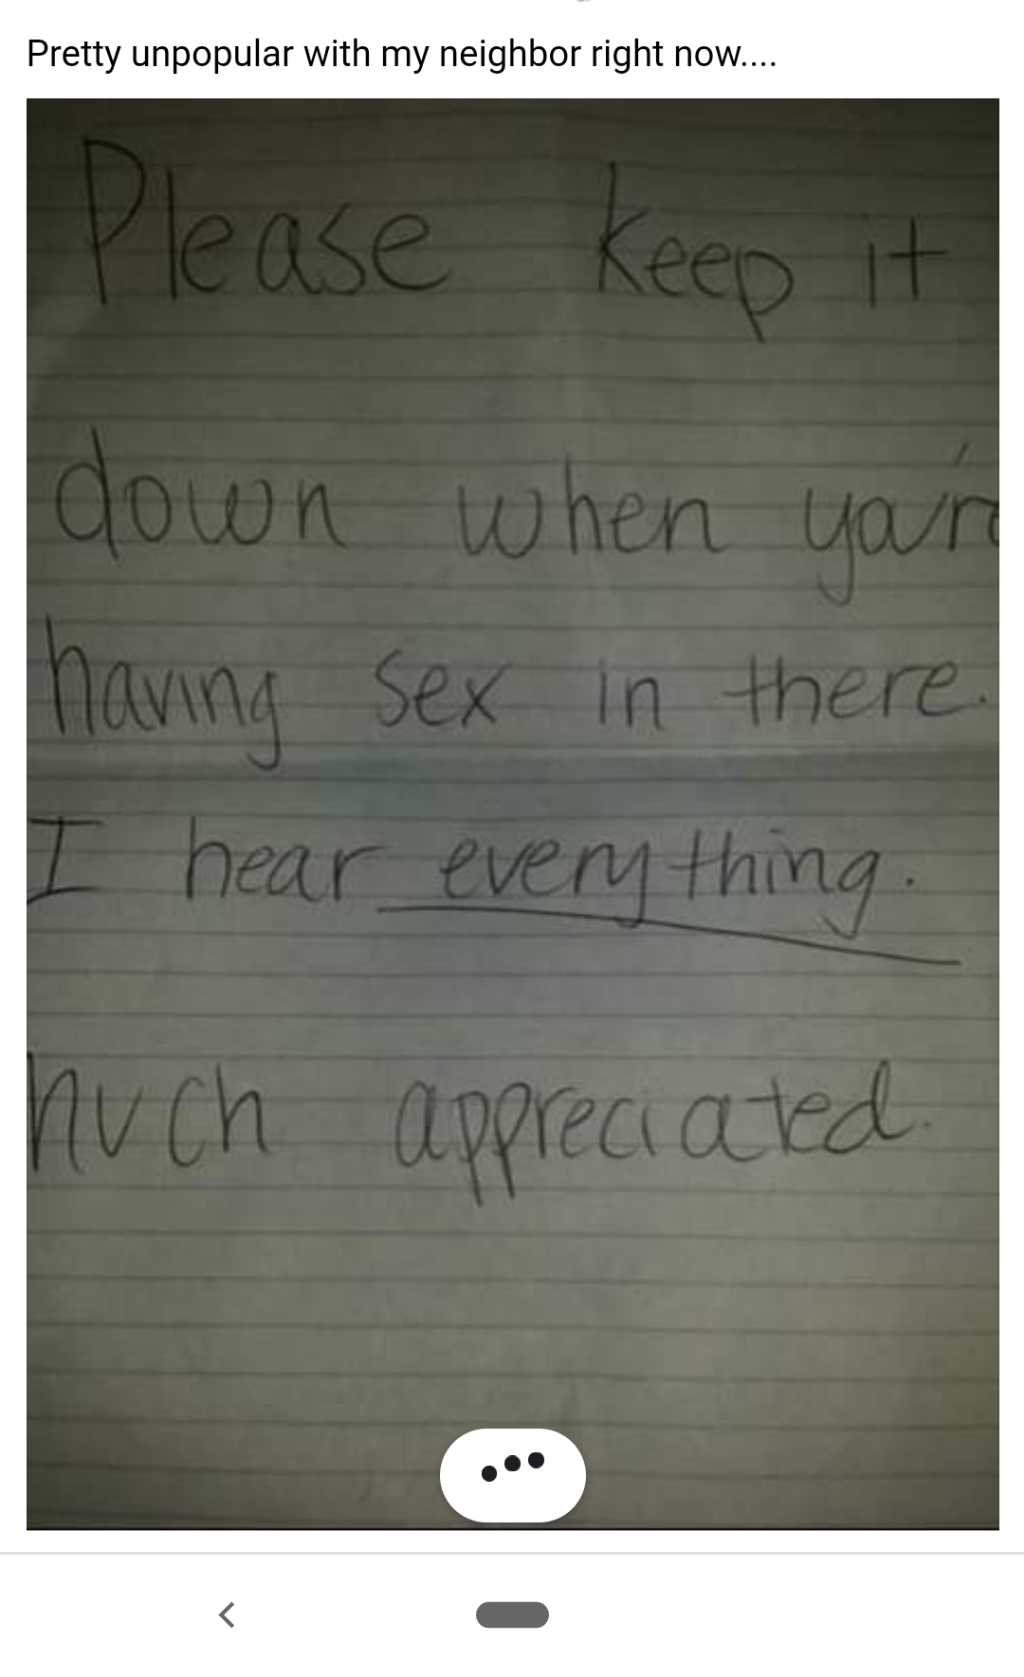 handwriting - Pretty unpopular with my neighbor right now.... Please keep it down when your having sex in there I hear everything. nuch appreciated